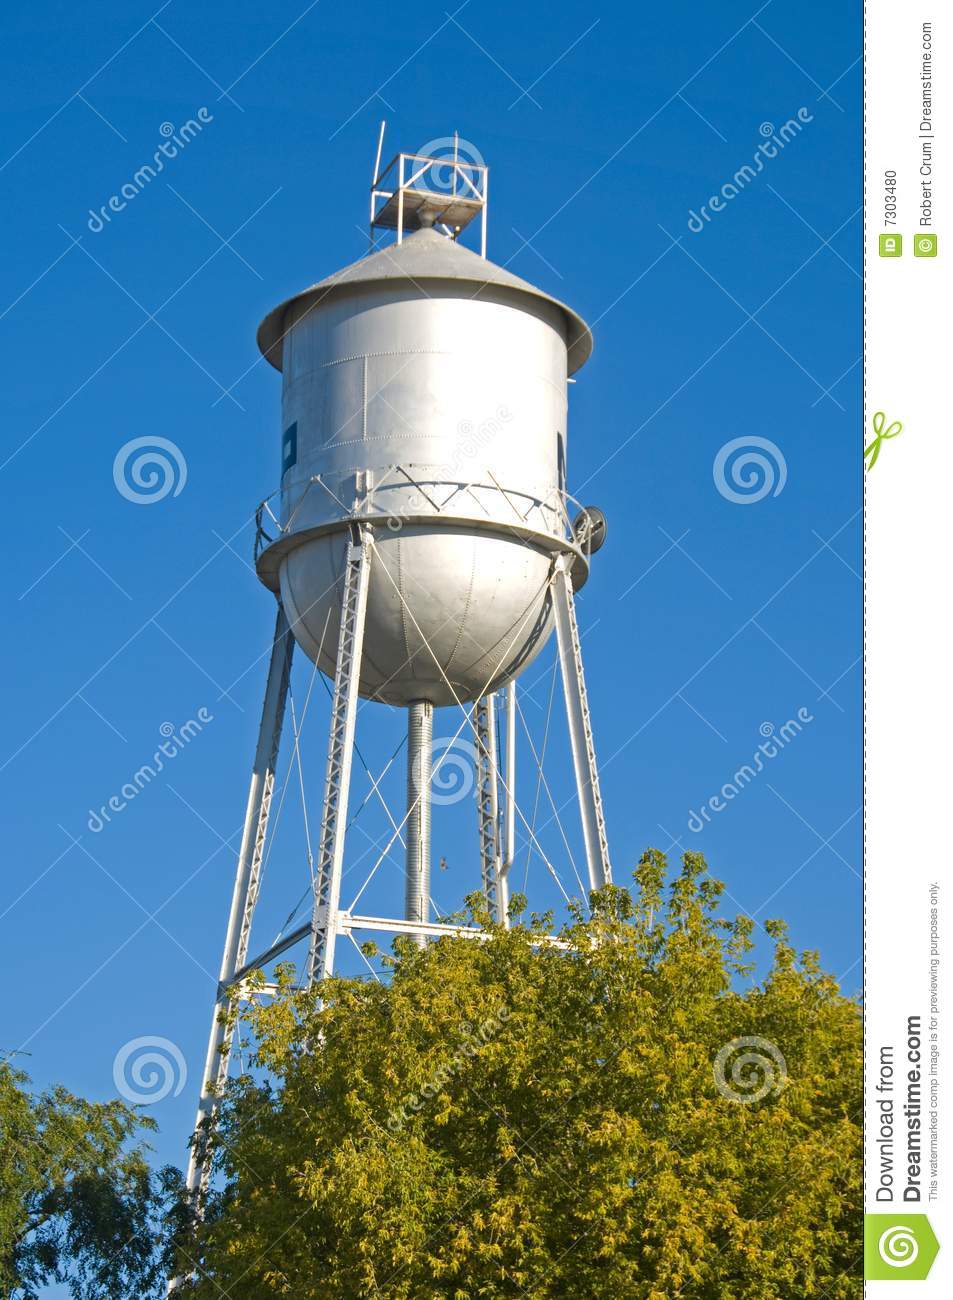 Old Fashioned Water Tower Stock Photo   Image  7303480